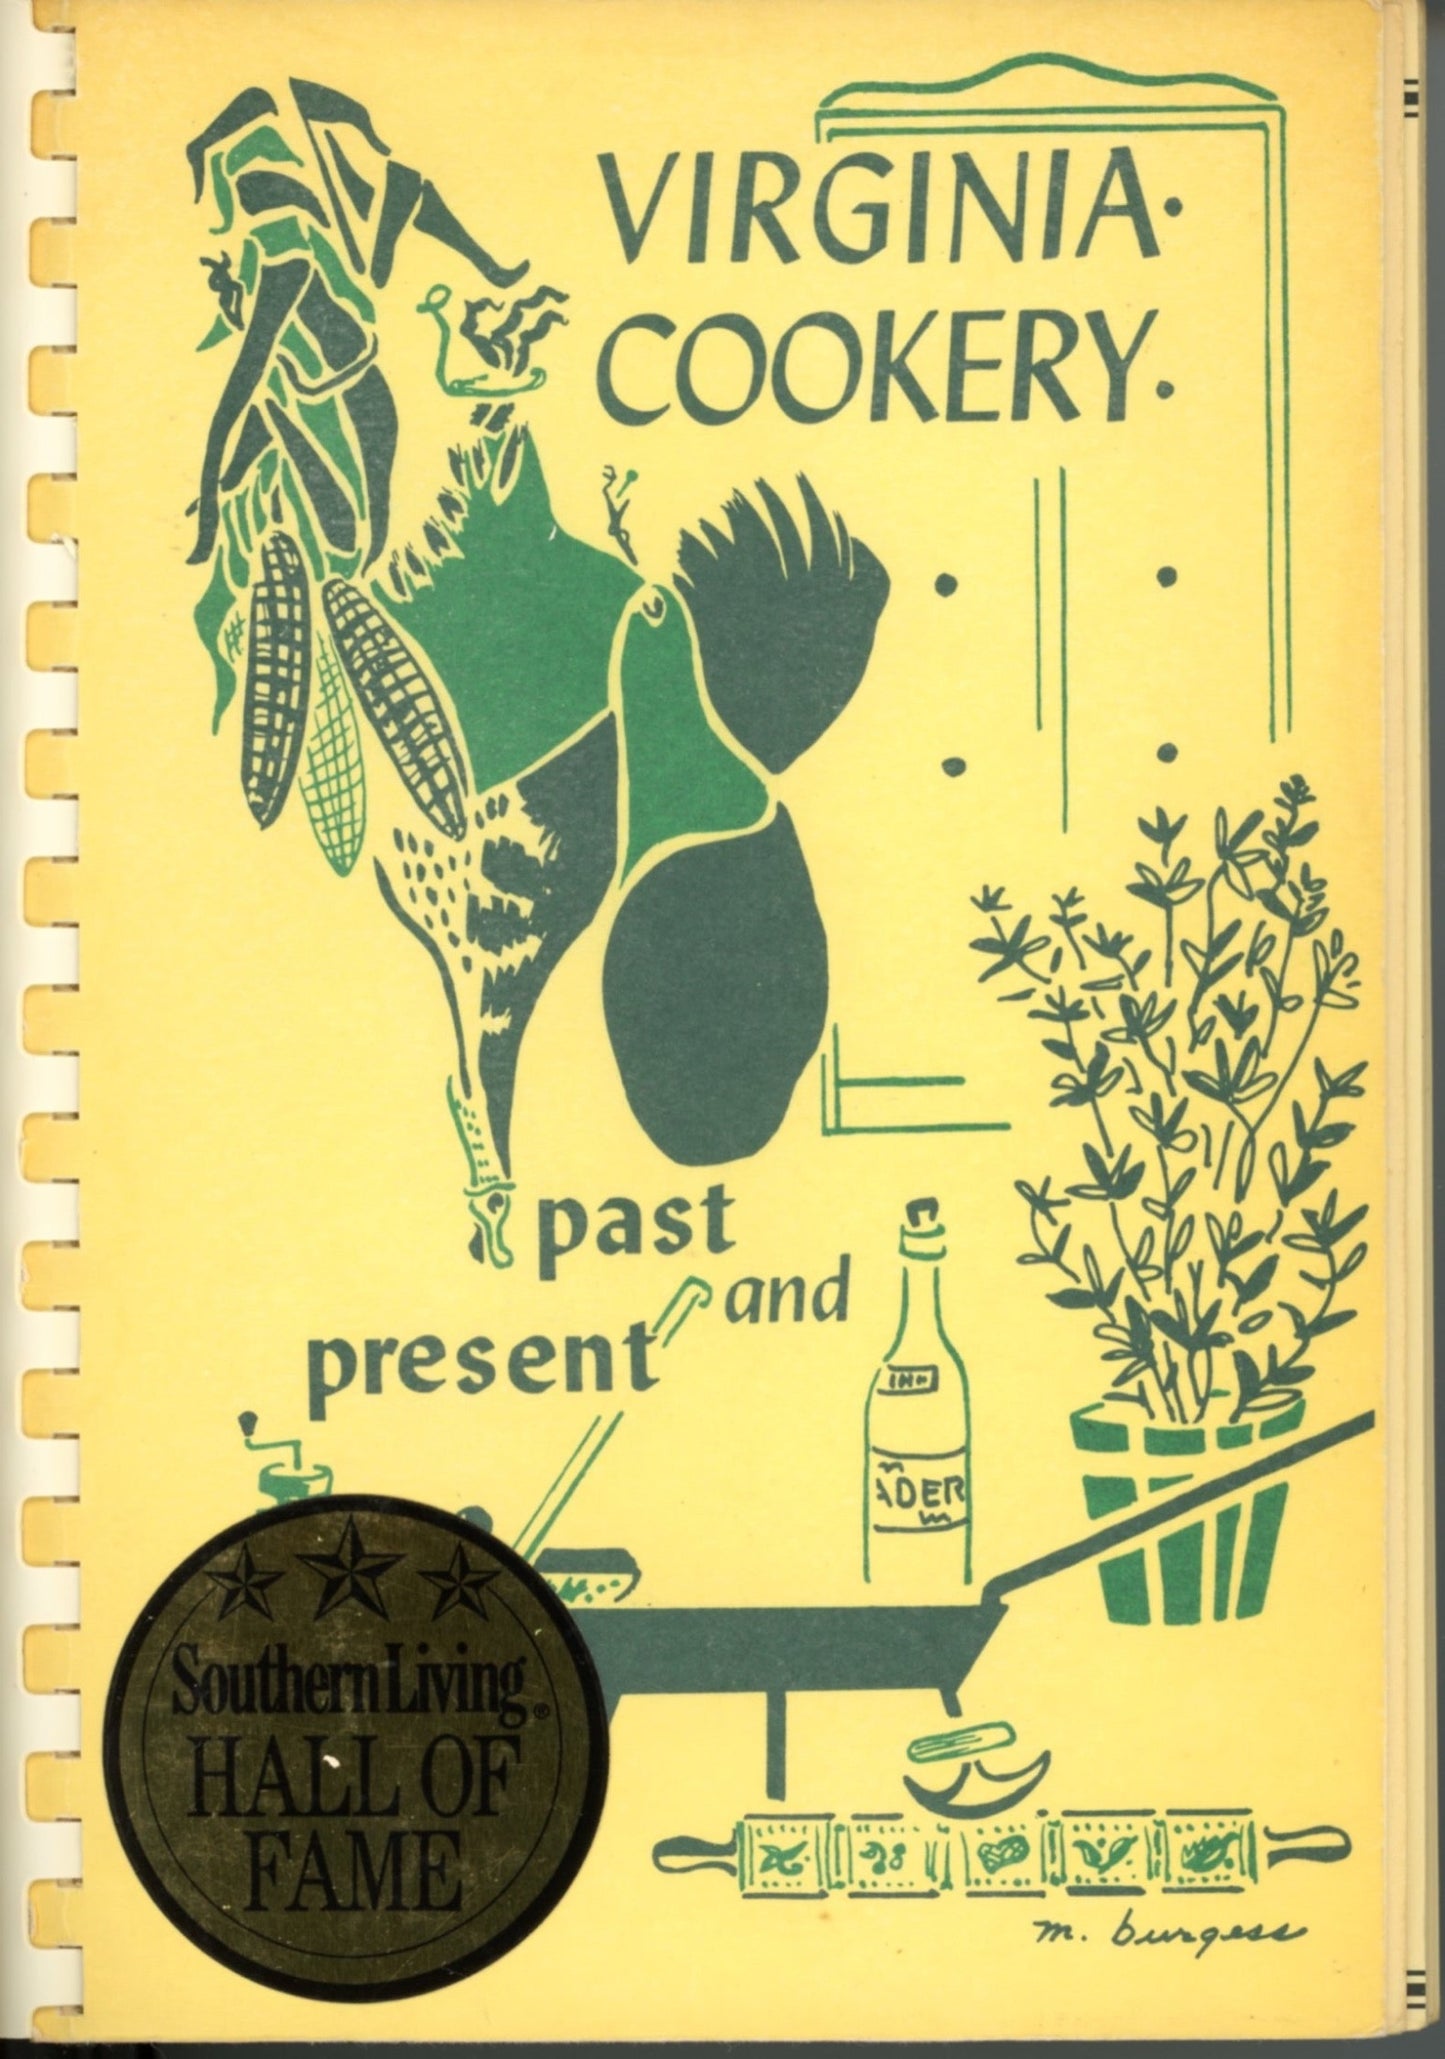 VIRGINIA COOKERY: Past & Present | Women's Auxiliary of Olivet Episcopal Church | Franconia, Virginia | 1993 ©1957